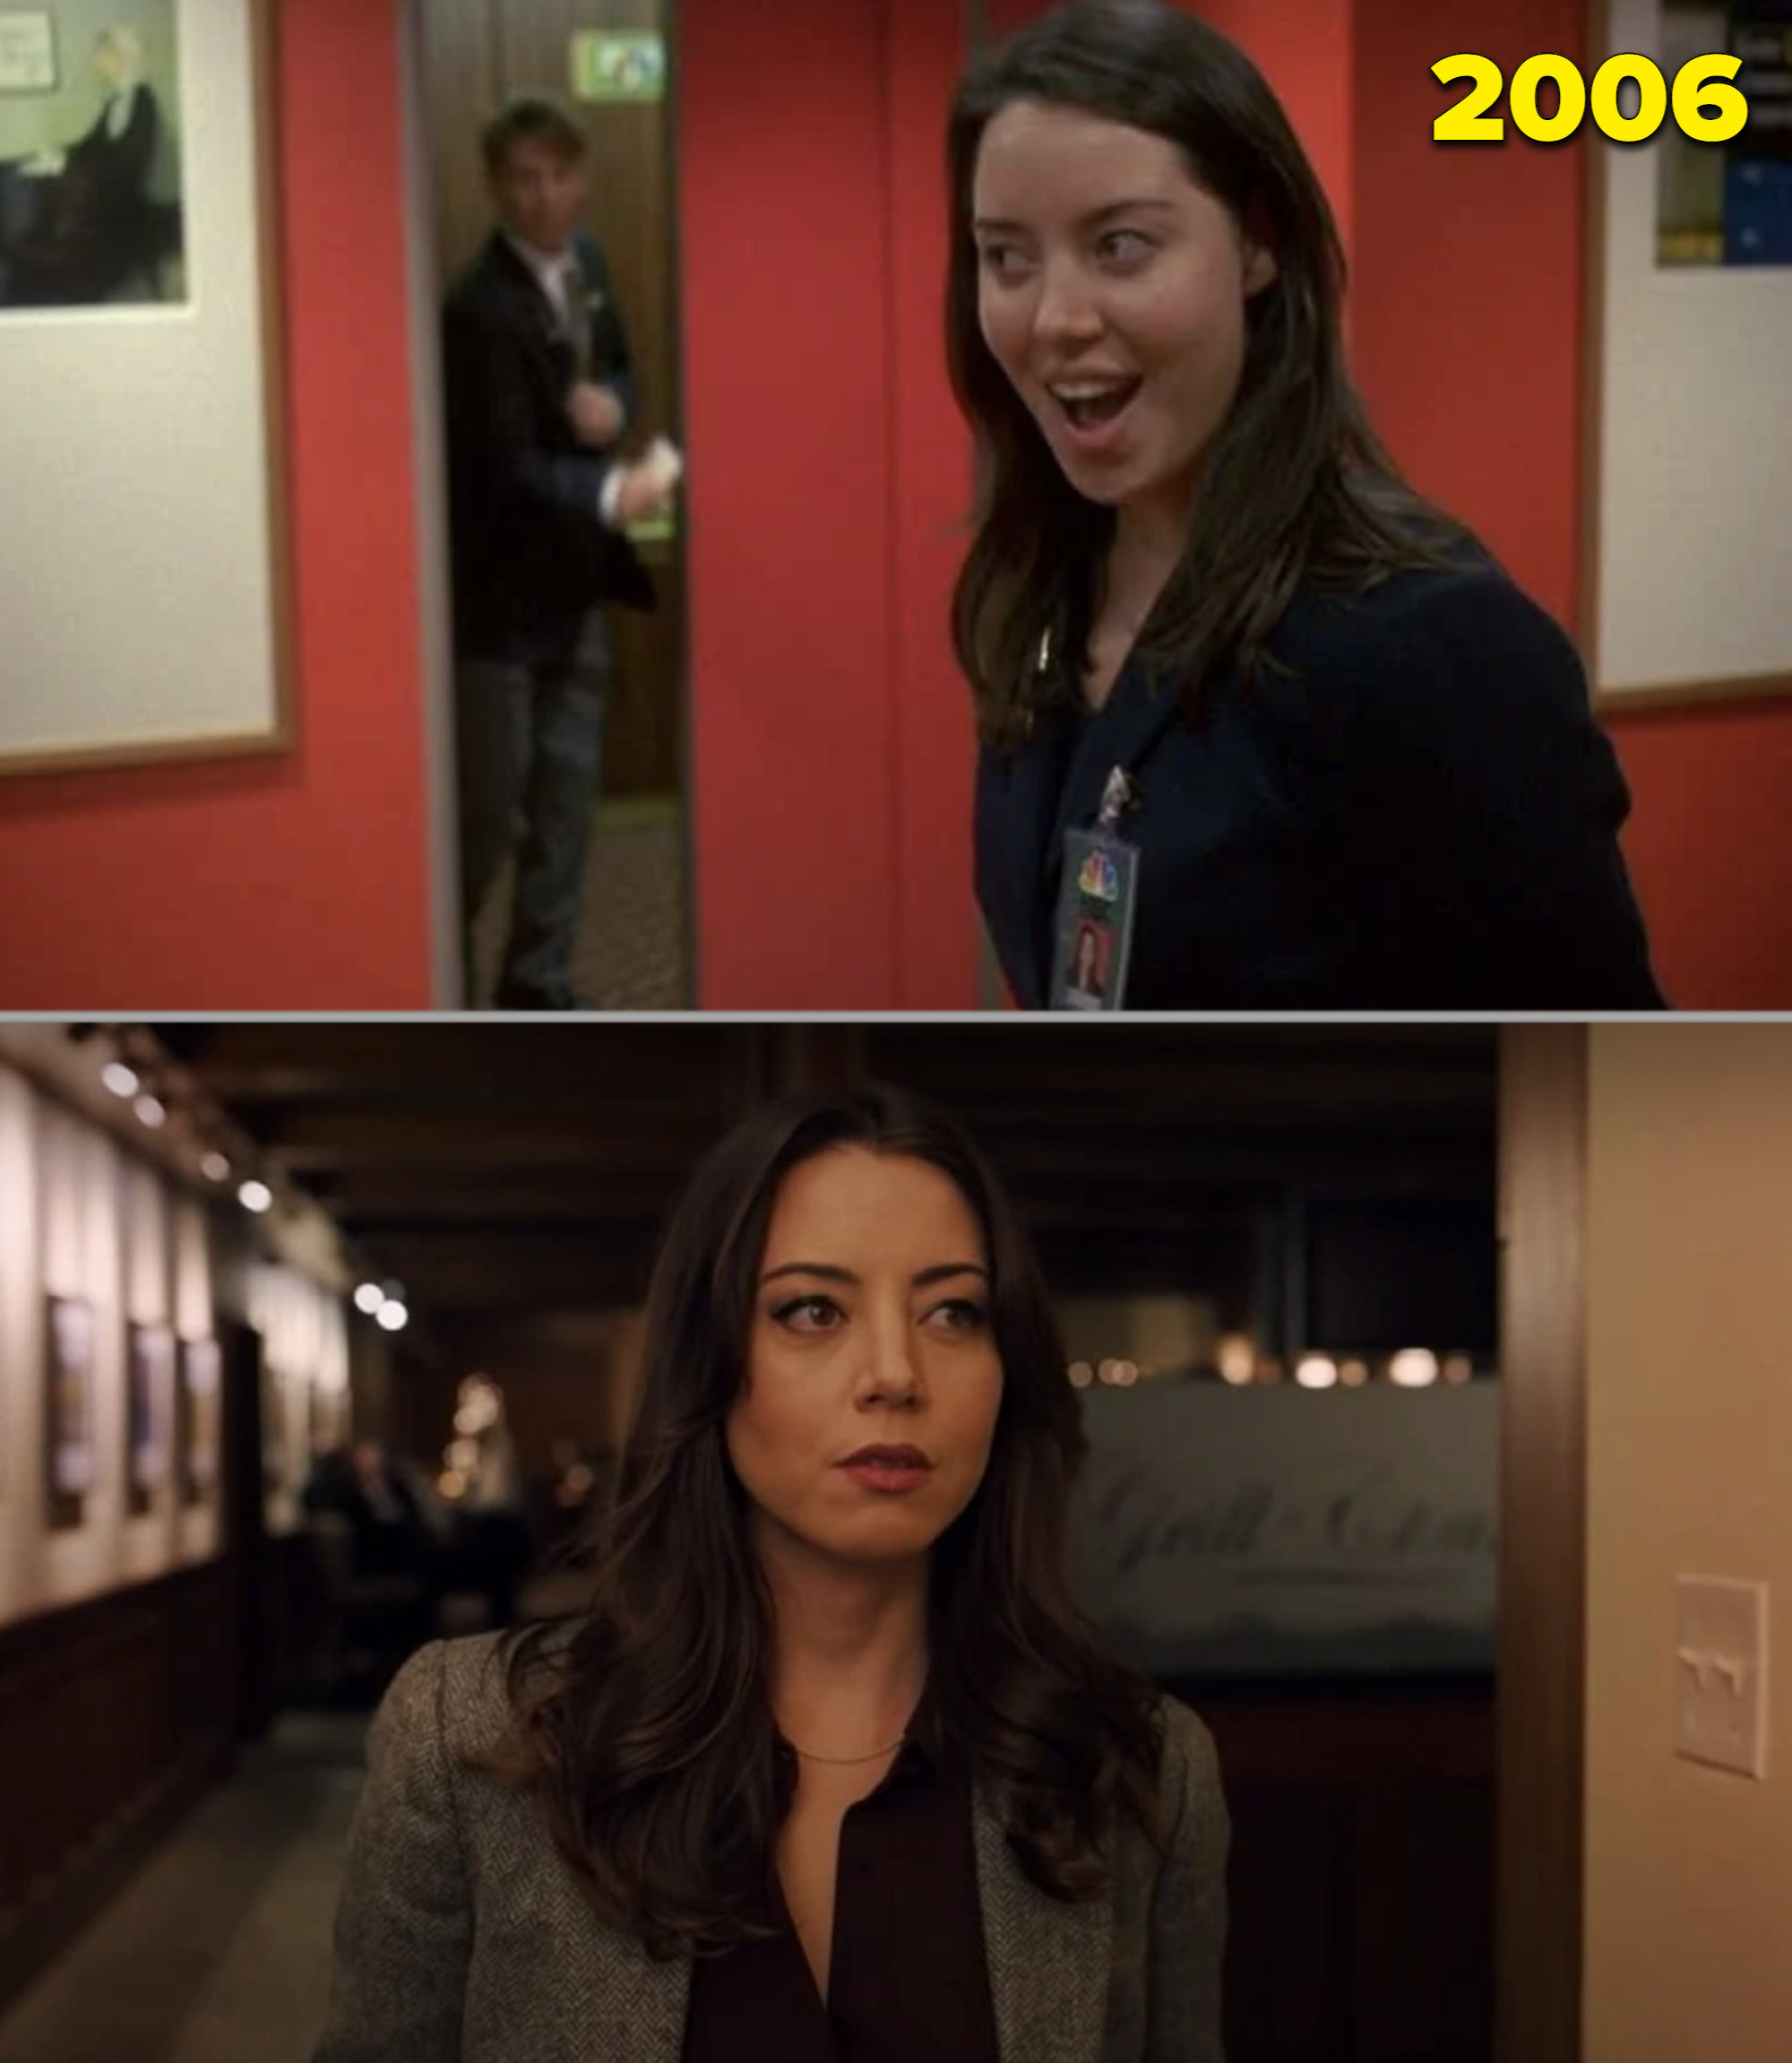 Aubrey as a Page in &quot;30 Rock&quot; and as Harper in &quot;Happiest Season&quot;